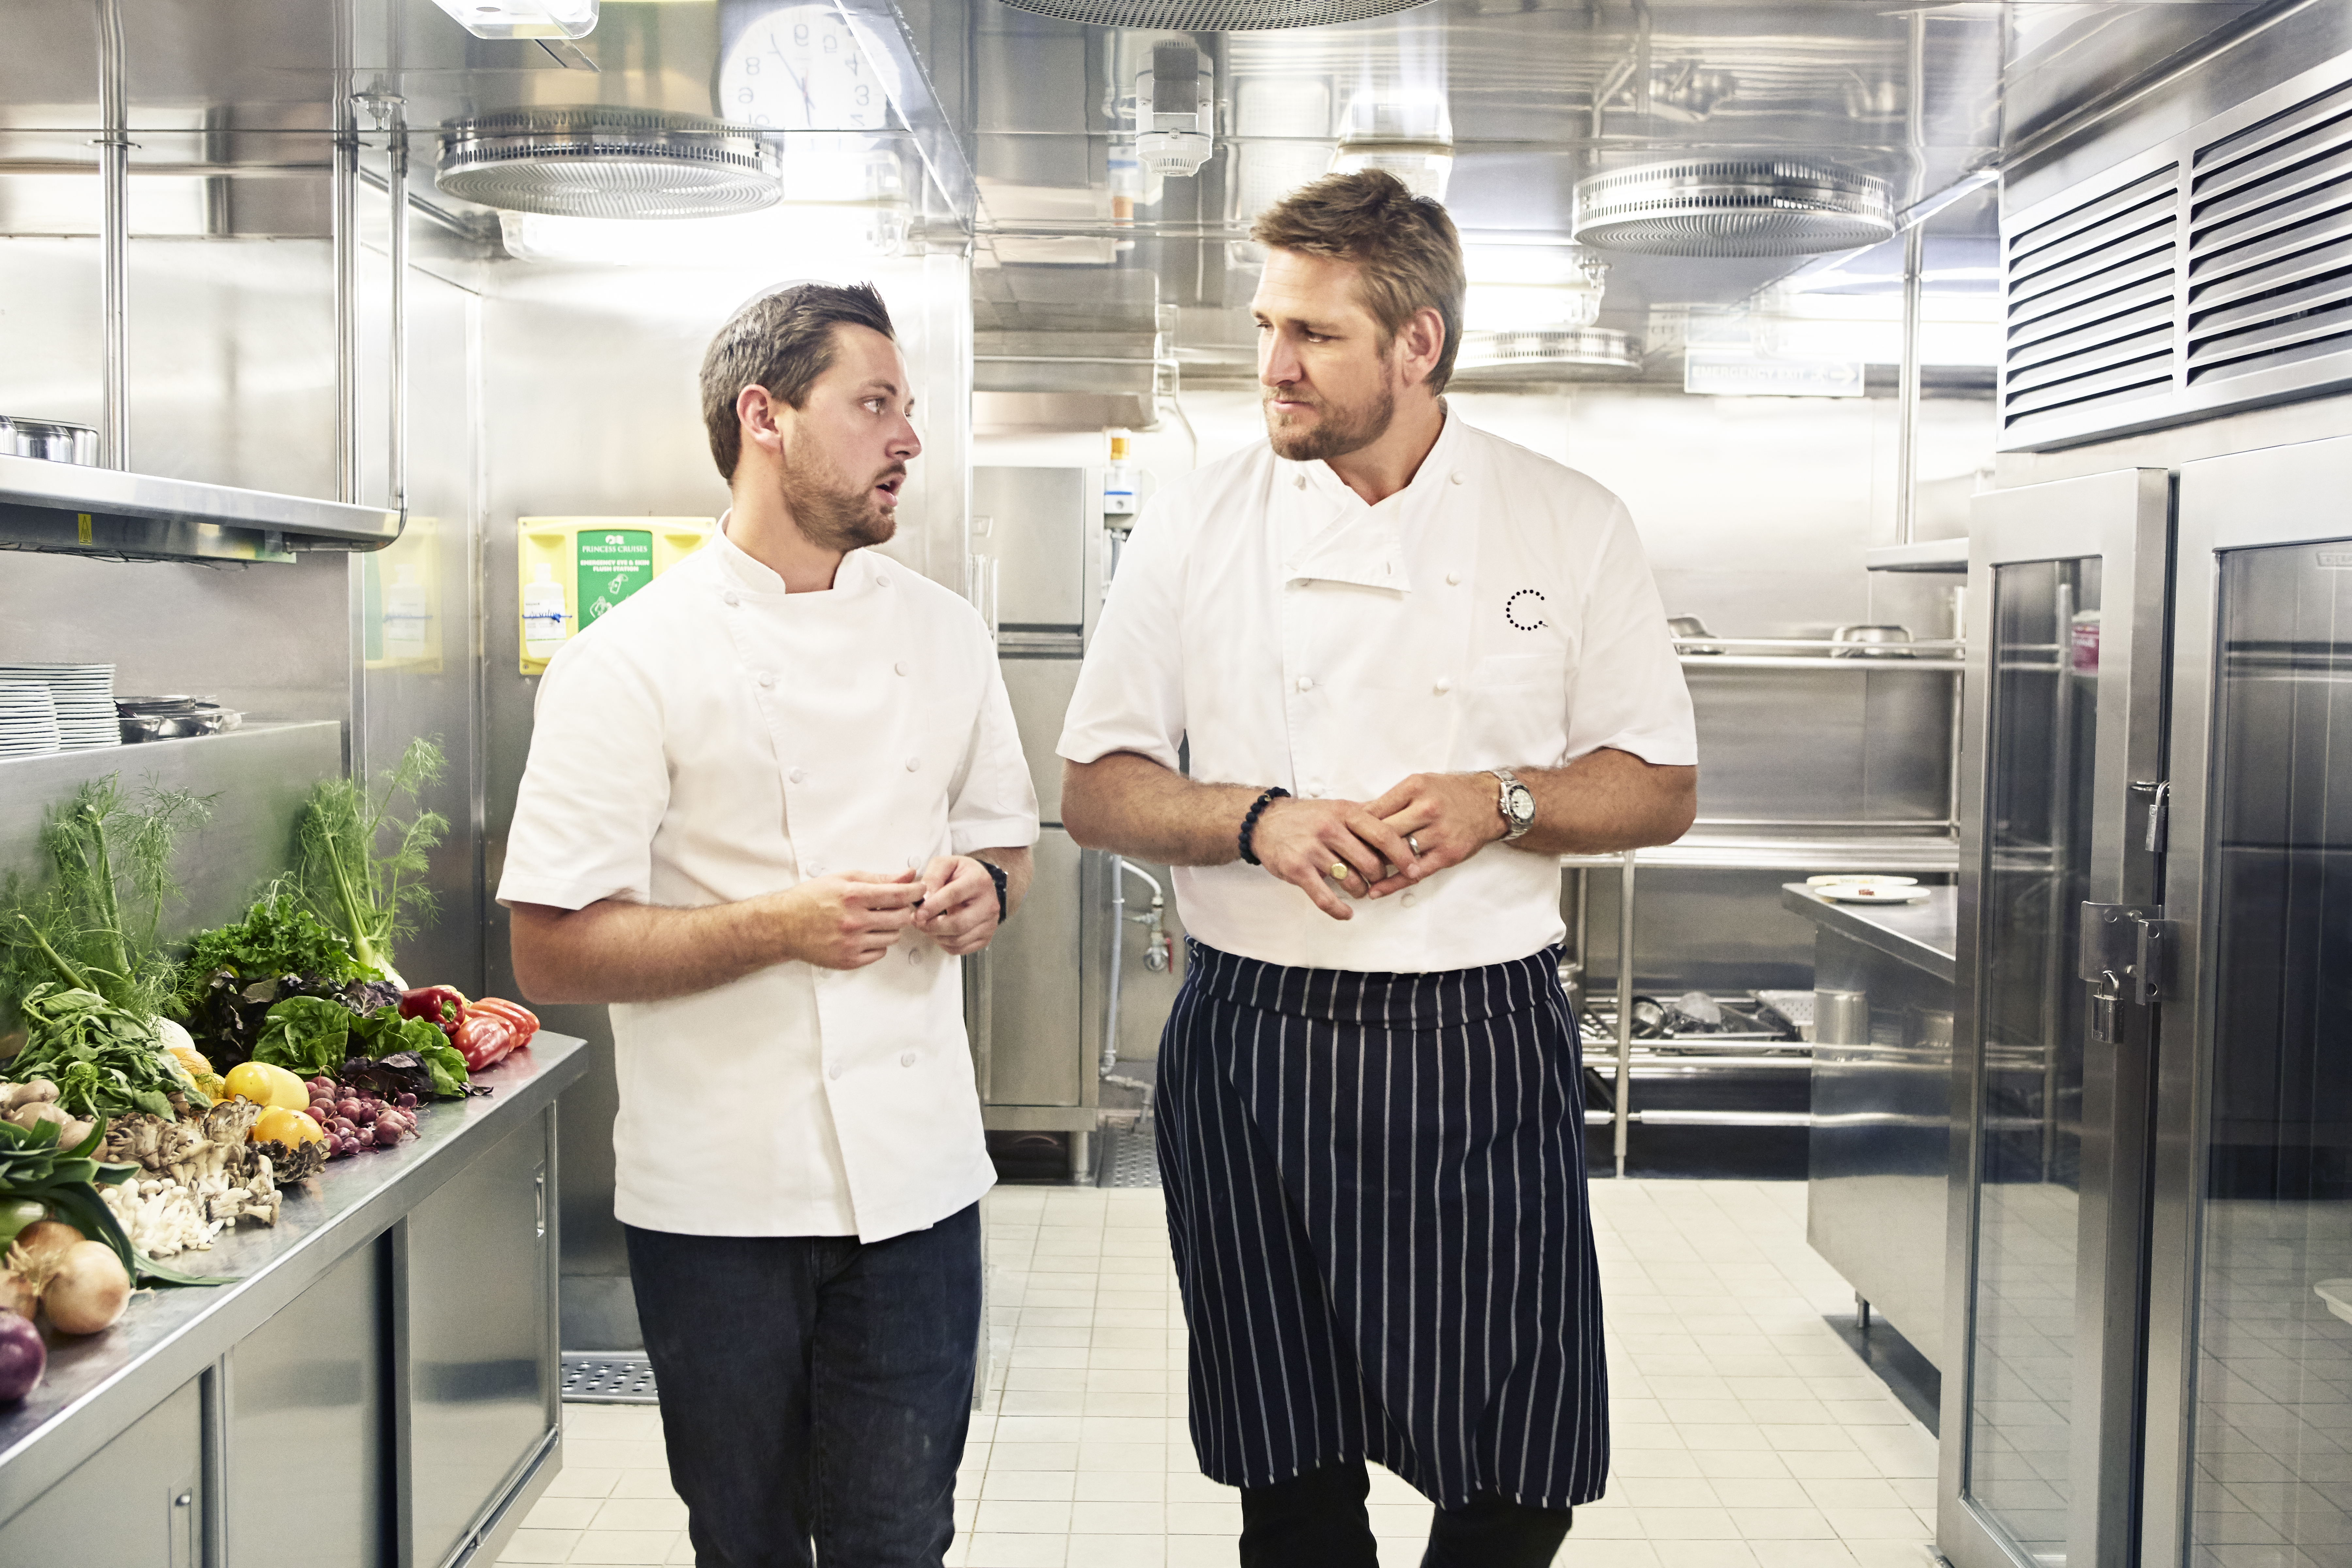 Curtis Stone and Christian Dortch talk while walking through a kitchen in chef’s clothes.